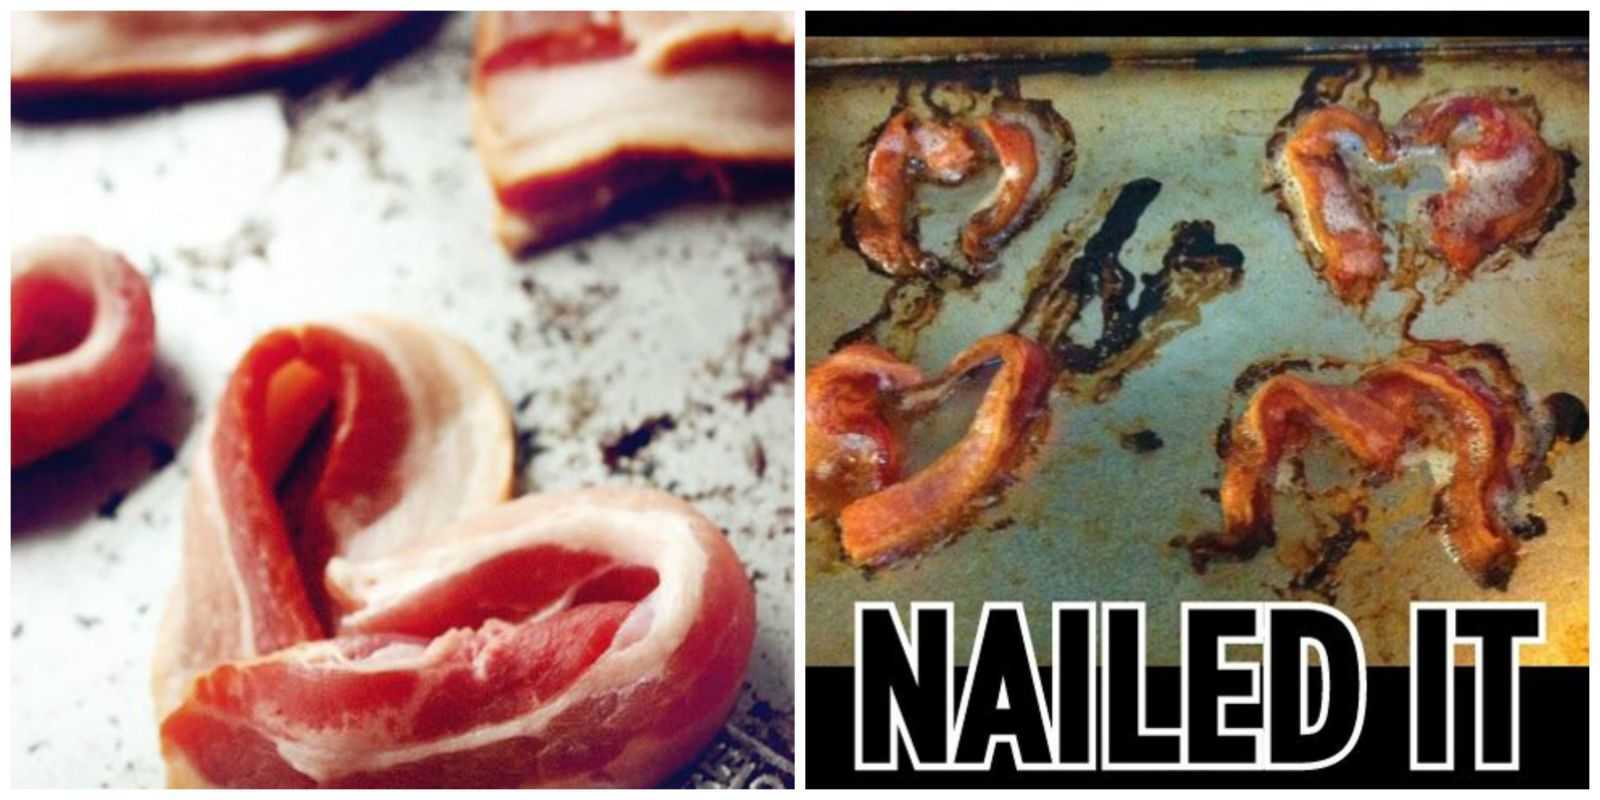 25 Pinterest Fails That Will Make You Die Laughing